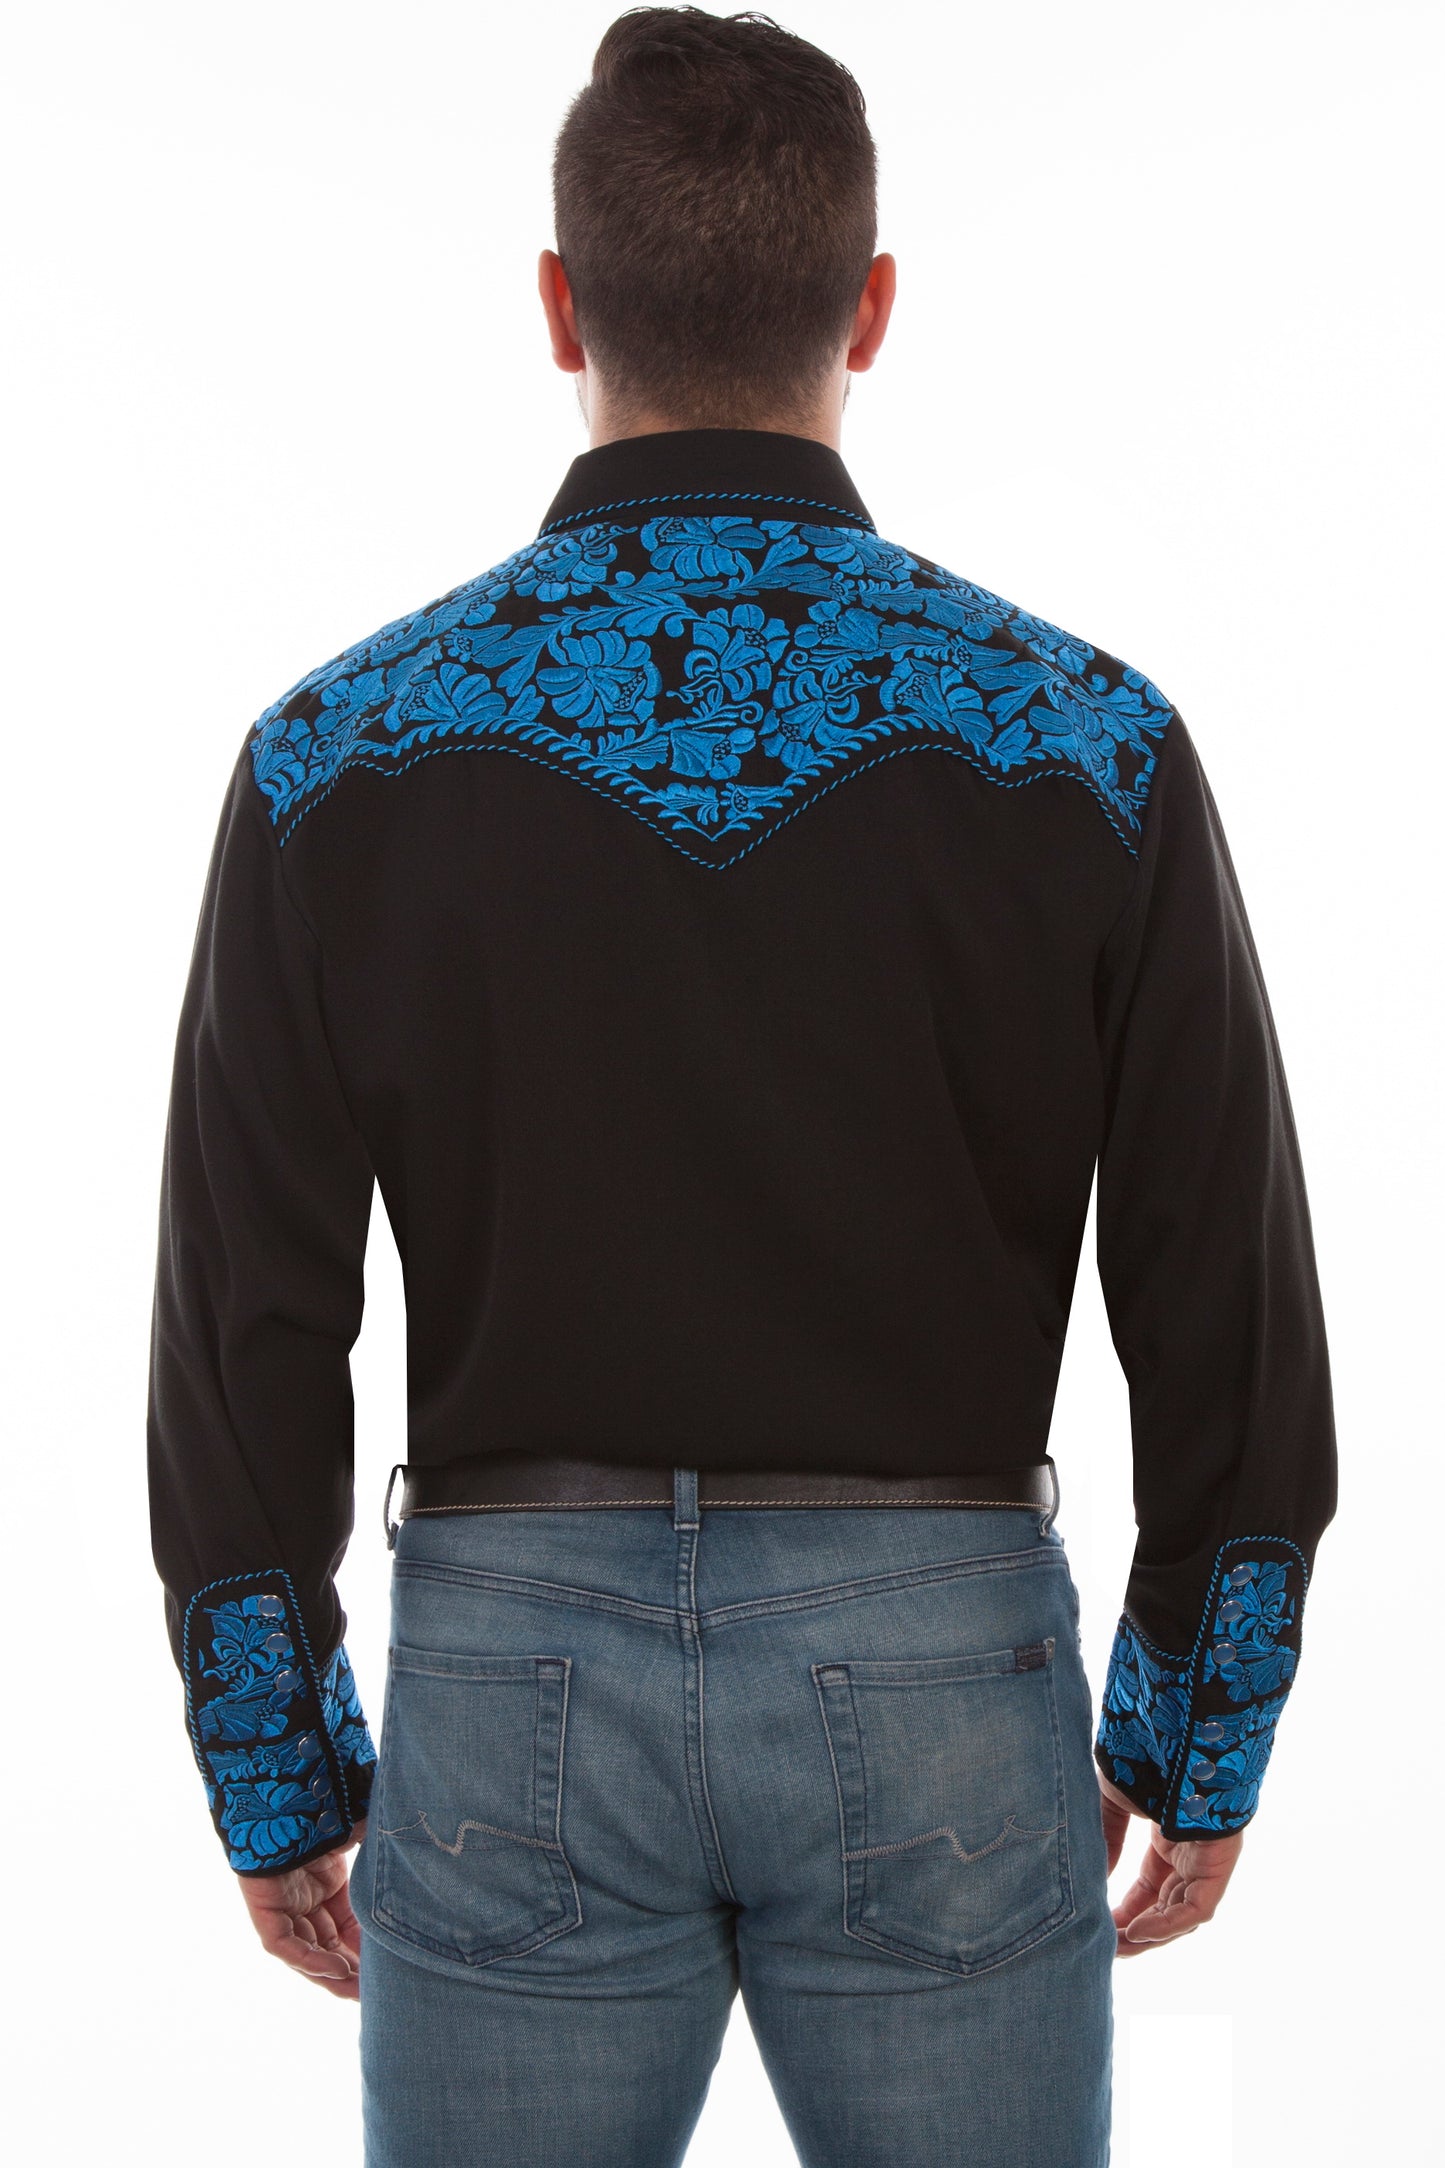 Floral Tooled Embroidery Shirt